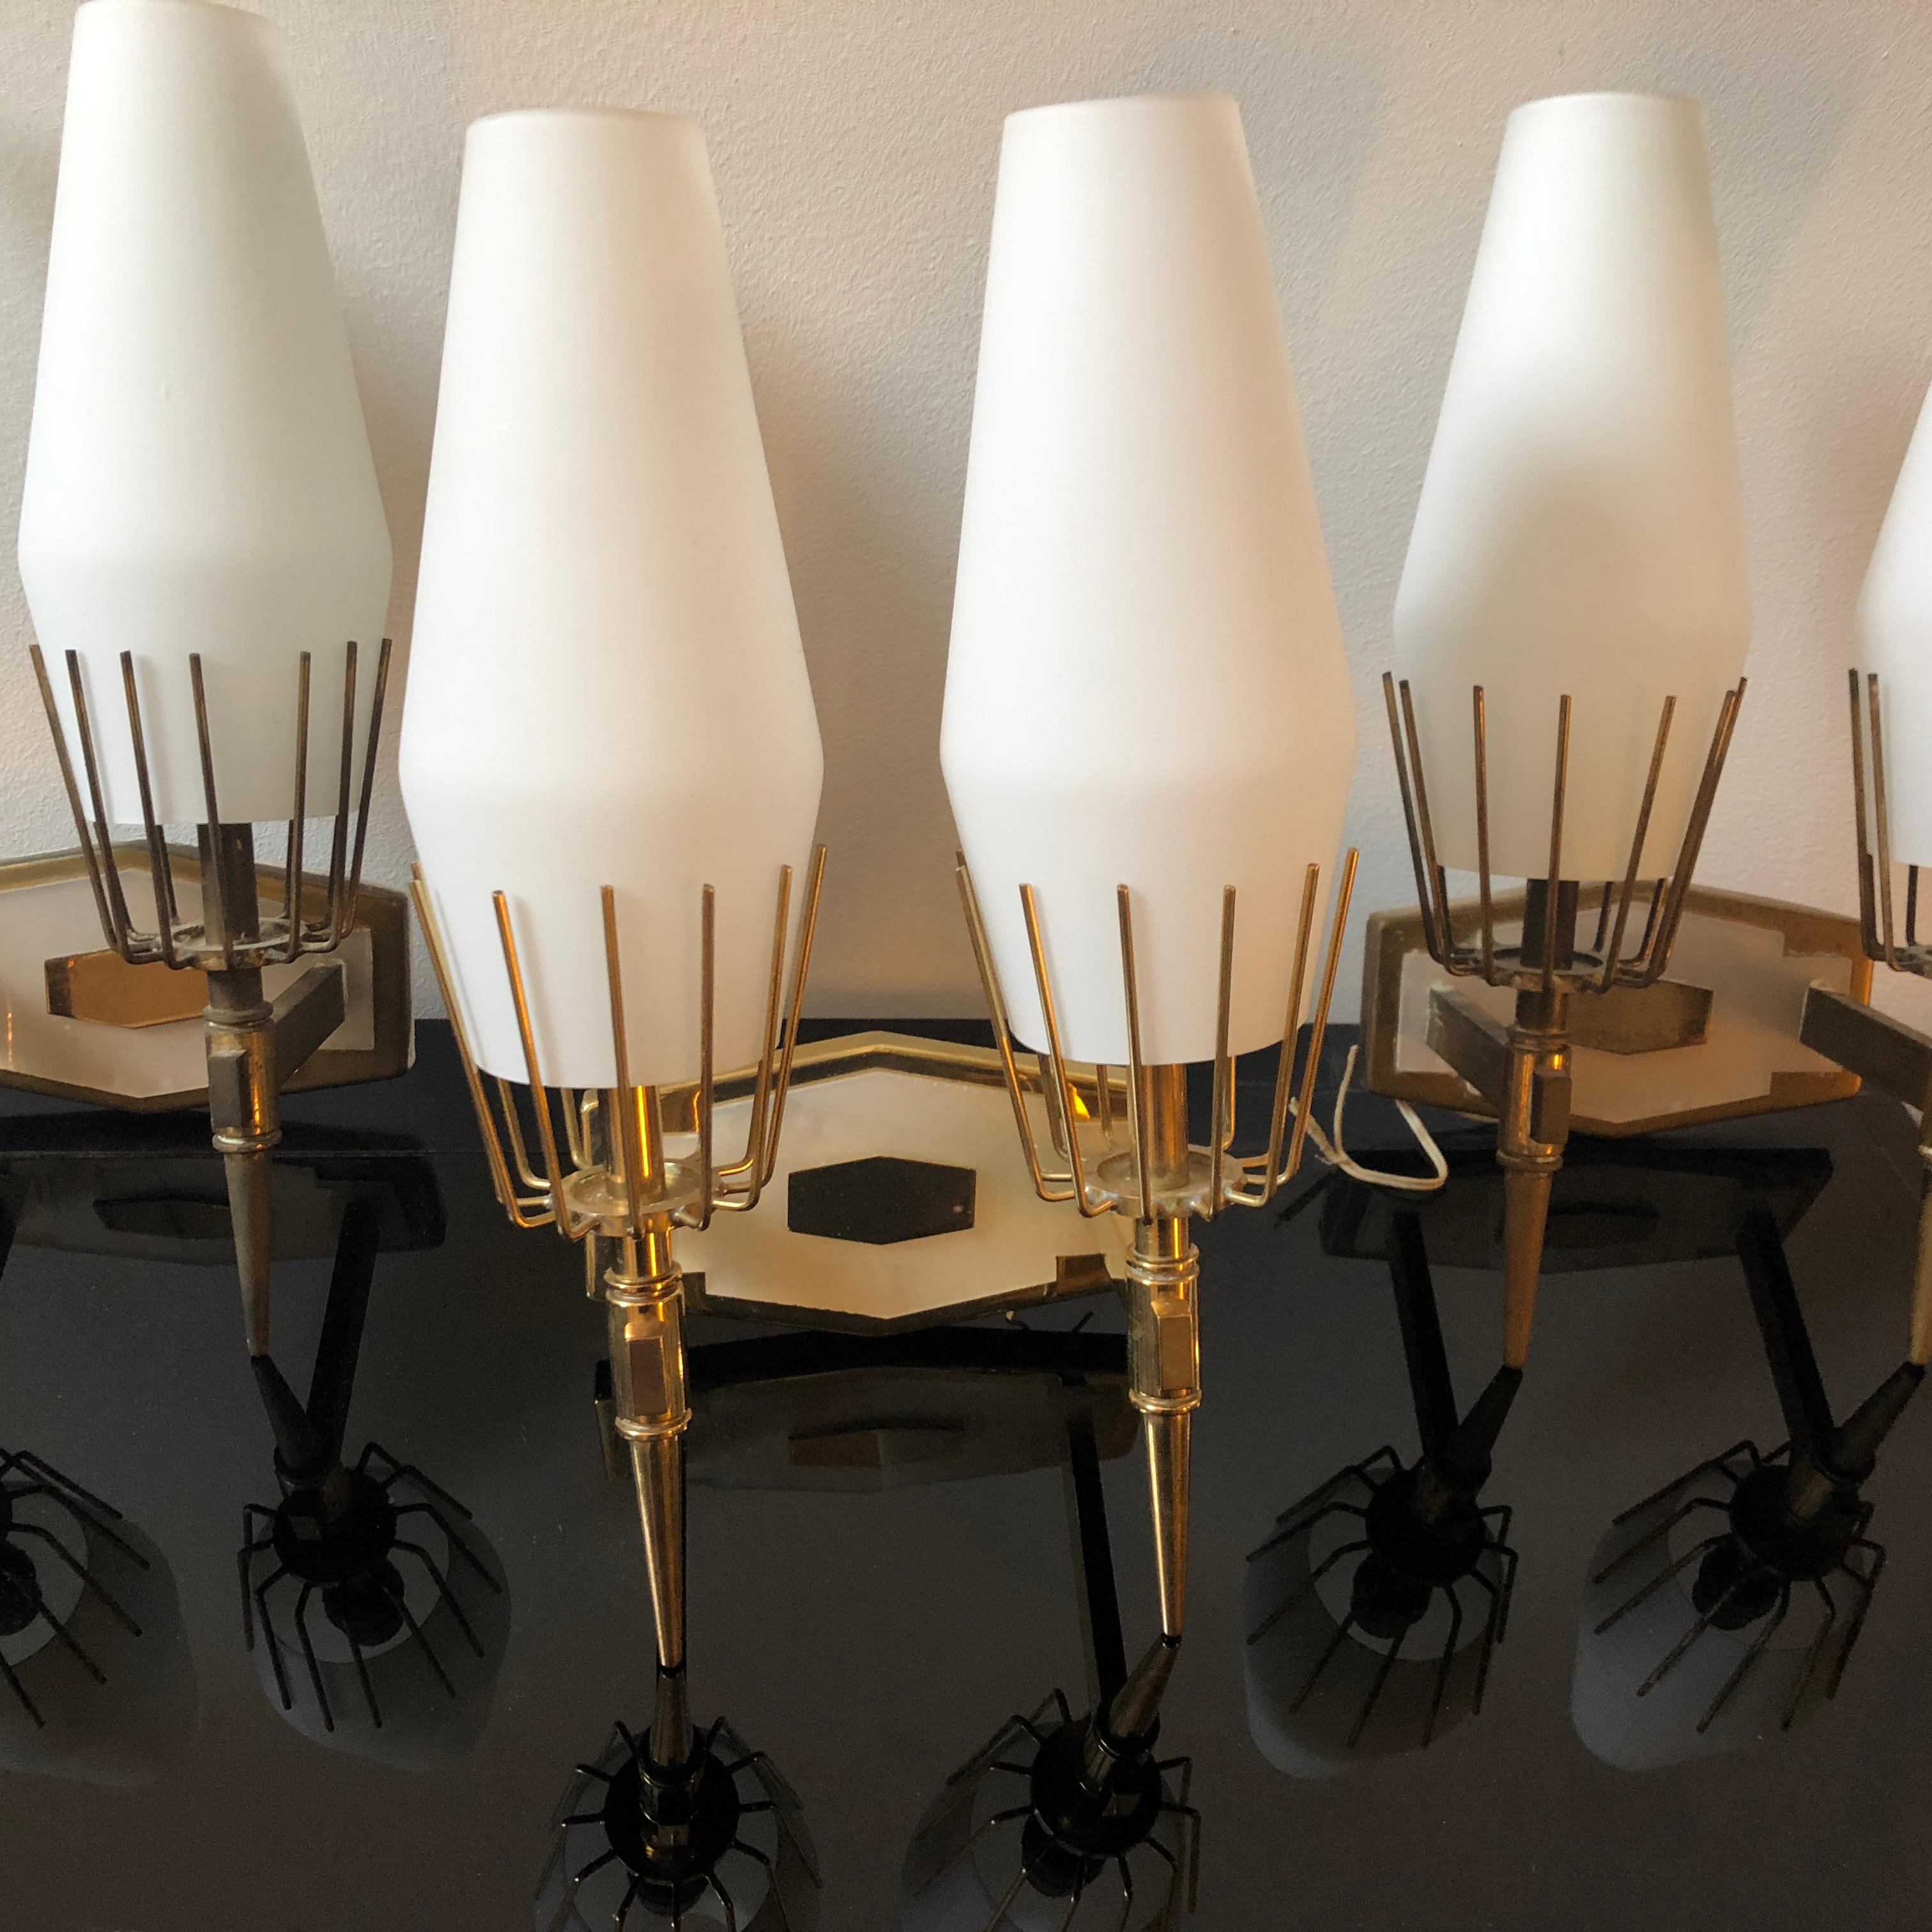 Three Mid-Century Modern wall sconces made in Italy in the 1950s, brass and white glass in perfect conditions, they have also in the front a plastic part with a faux white marble effect. As you can see in the pic, one of them has been perfectly